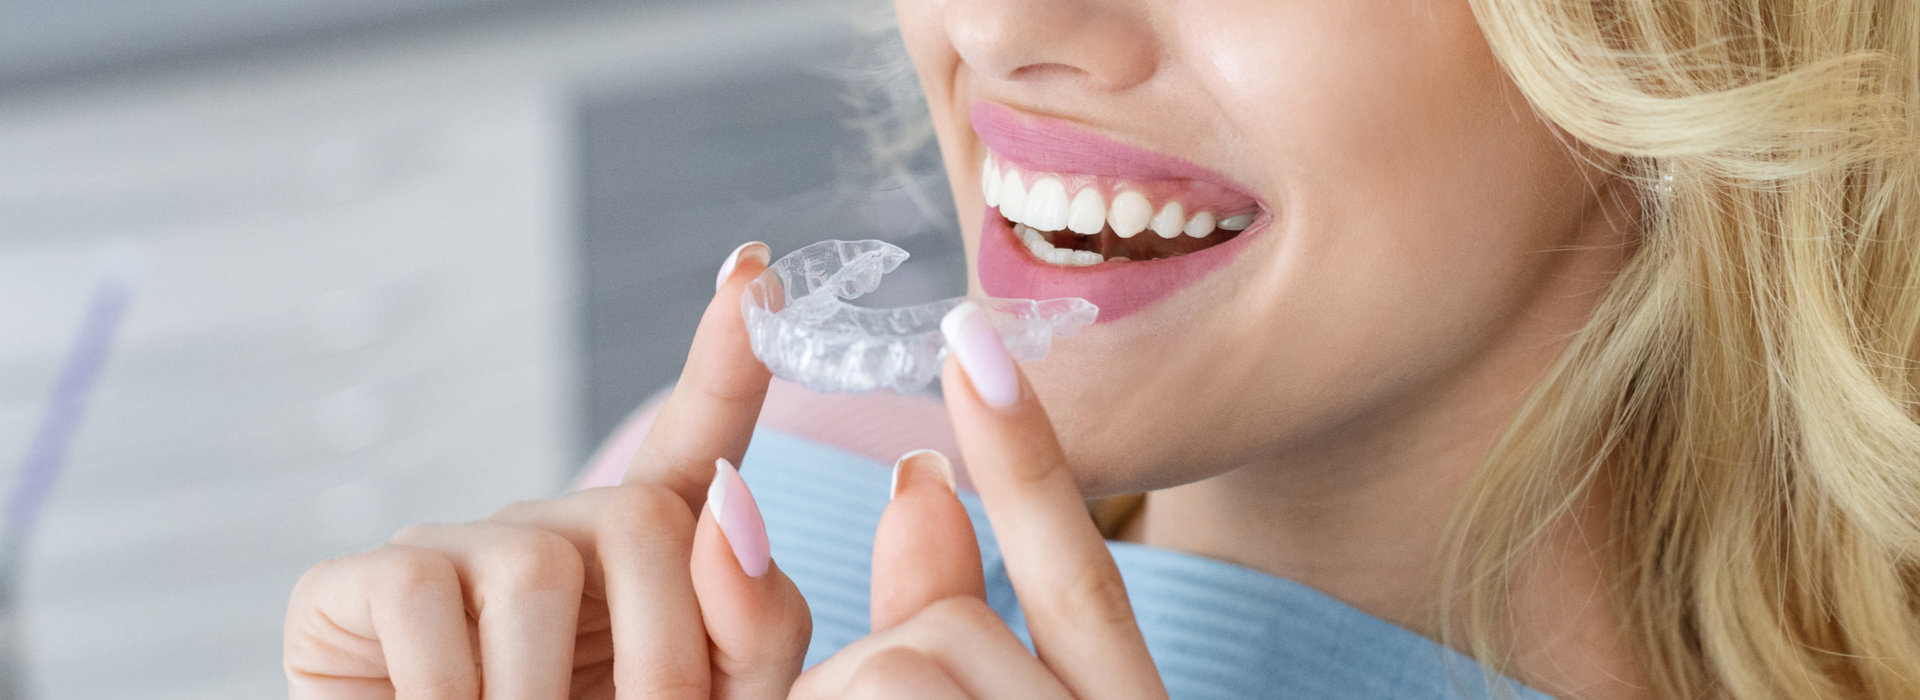 A woman holding a set of Invisalign braces.